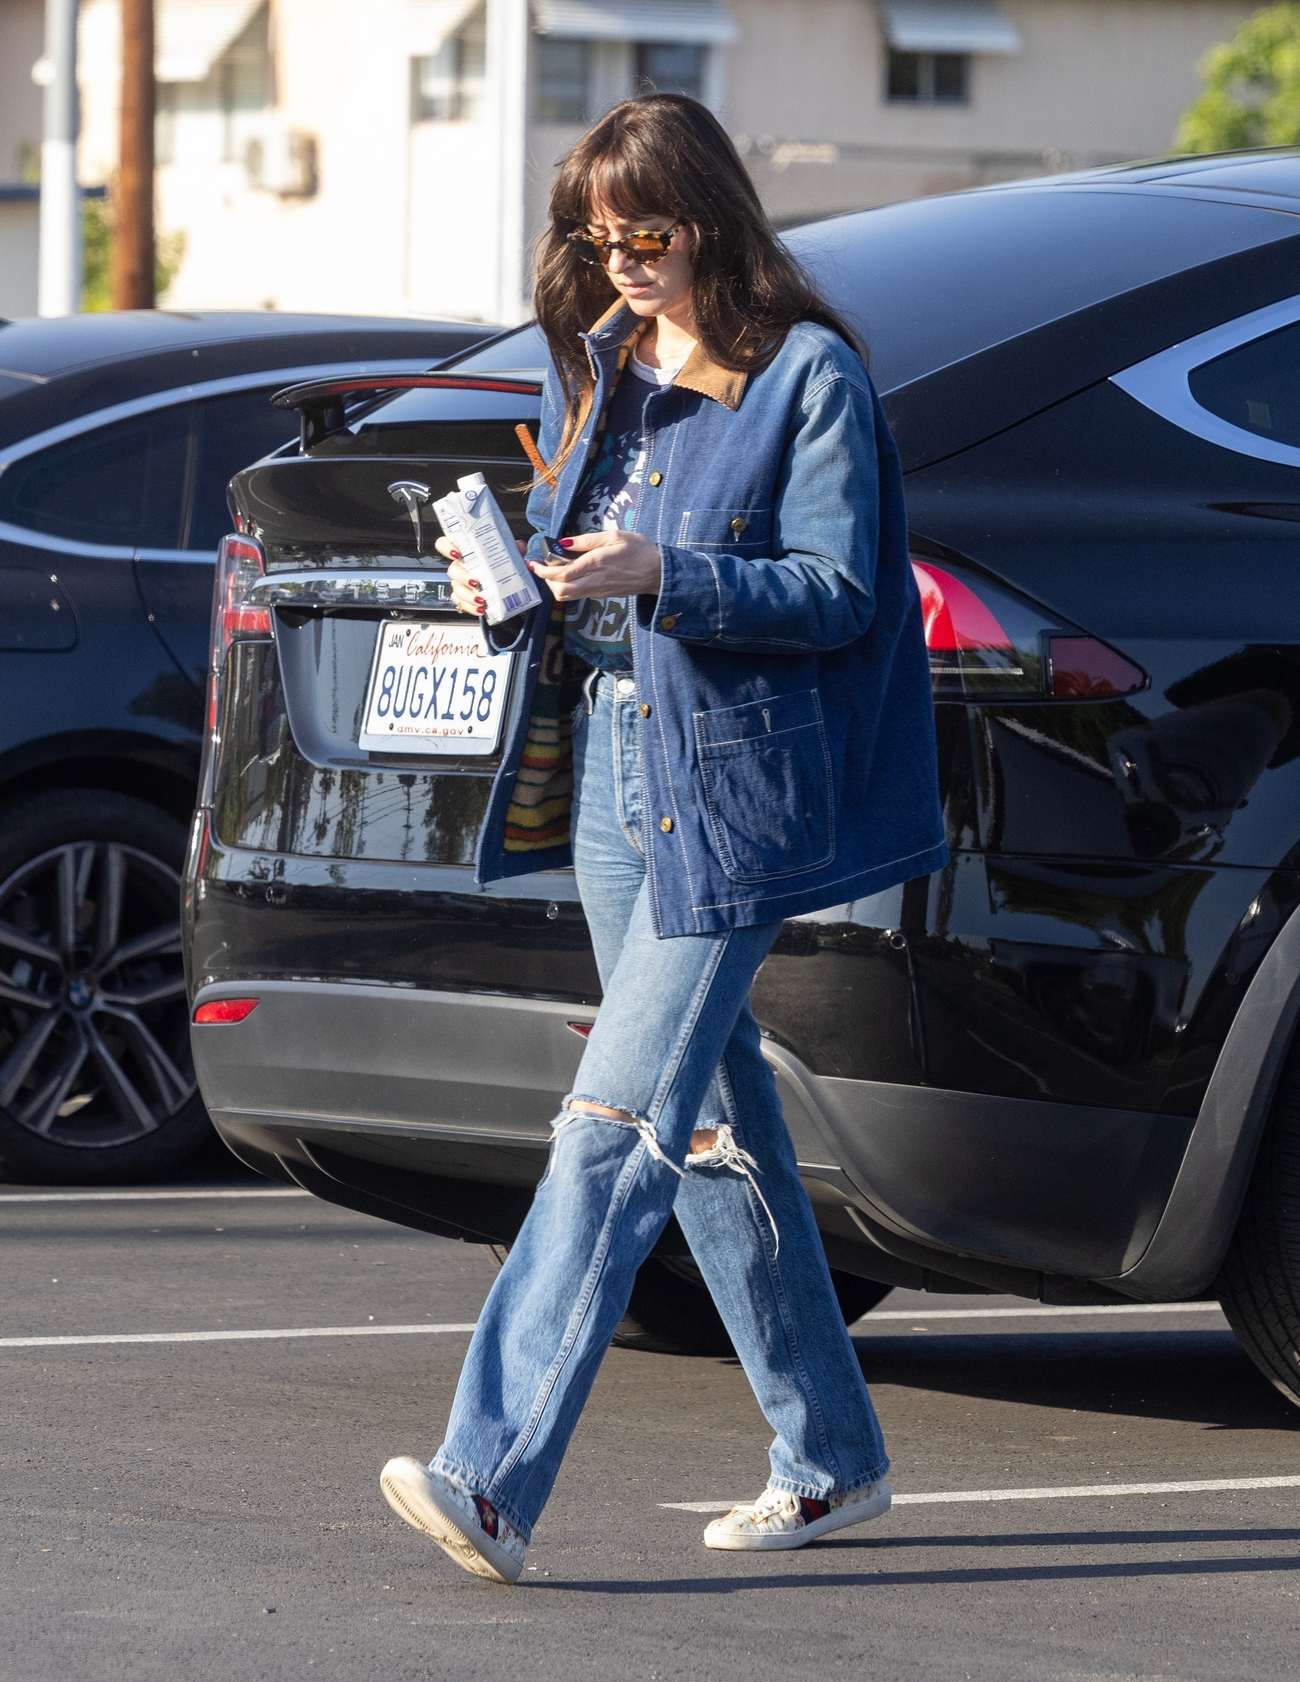 Dakota_Johnson_-_is_seen_out_and_about_running_errands_in_Los_Angeles2C_California__0513202302.jpg